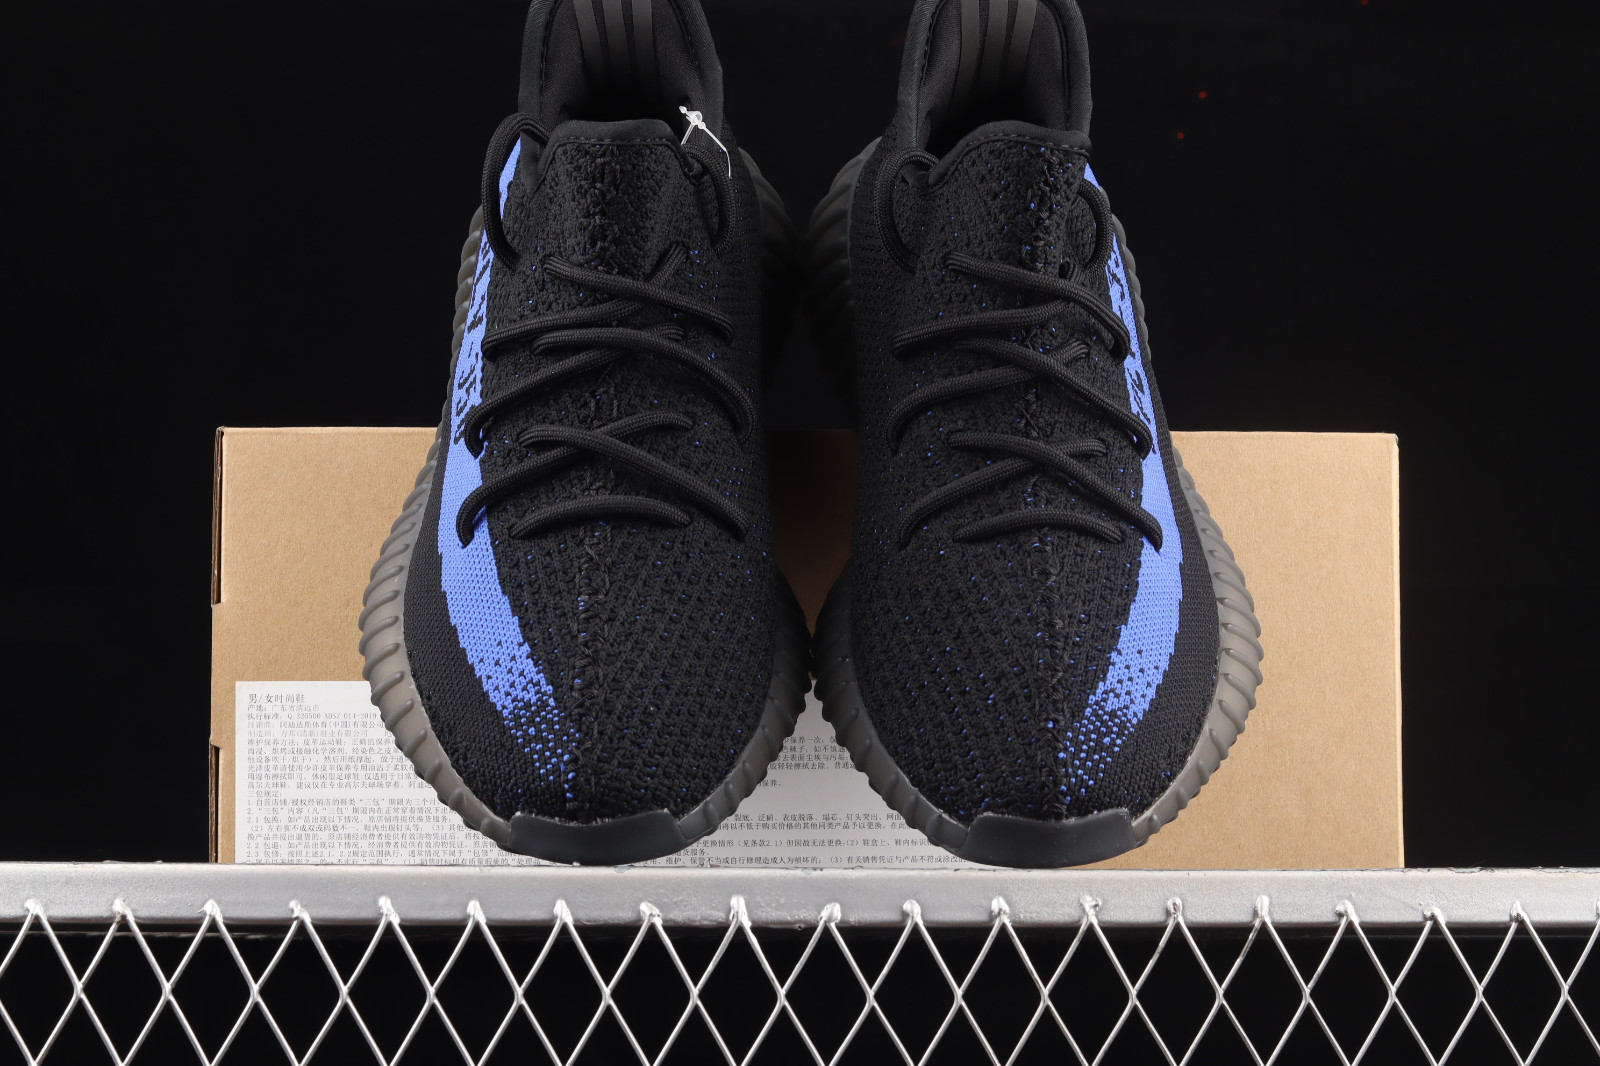 Sepsale - adidas stockholm 2008 price in canada - Adidas Yeezy 350 Boost Black Shoes GY7164